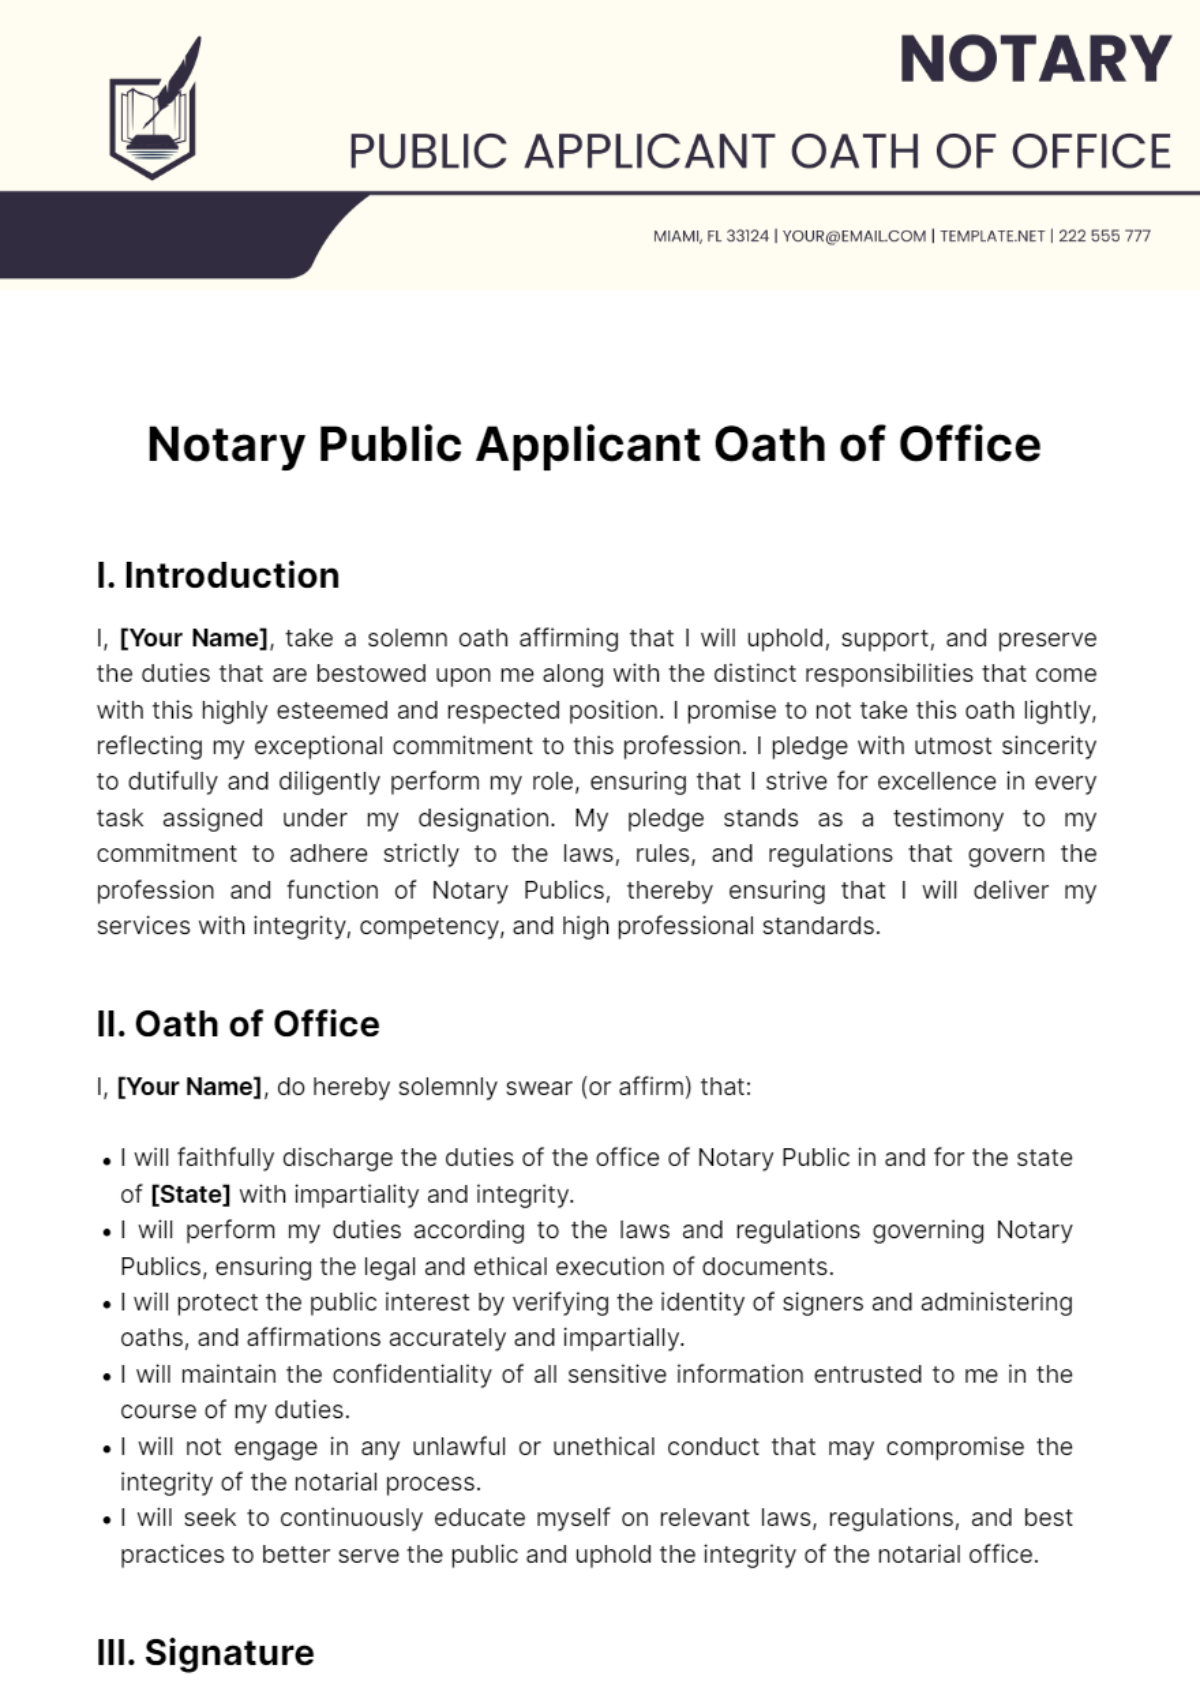 Free Notary Public Applicant Oath Of Office Template